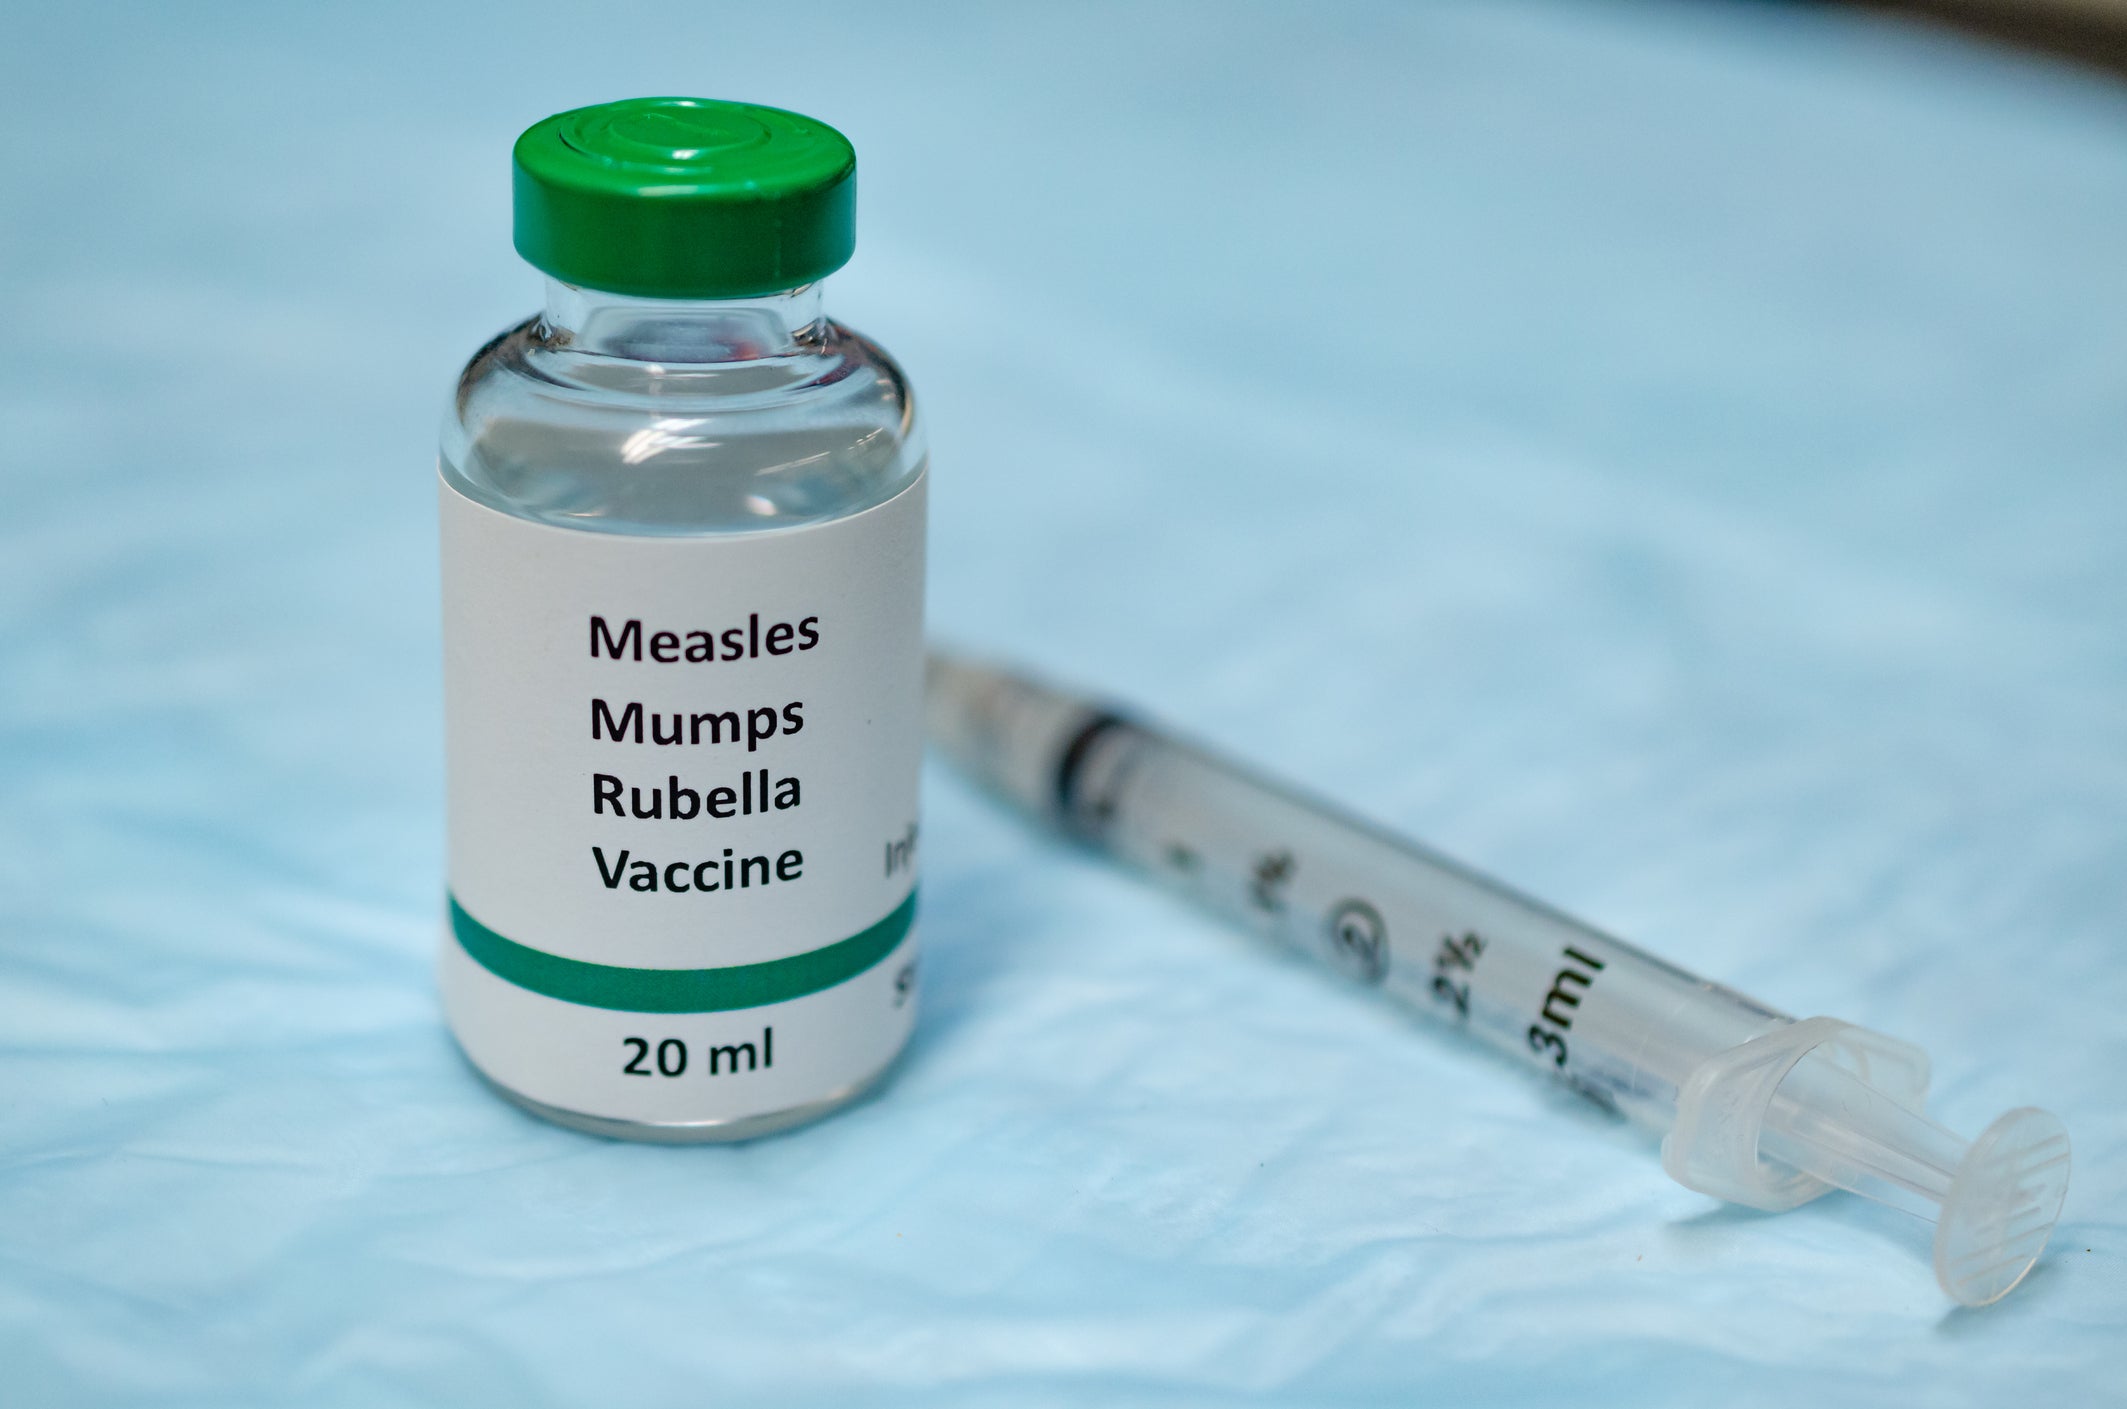 Measles vaccine coverage in the UK is low and doctors have urged parents to ensure their children are protected